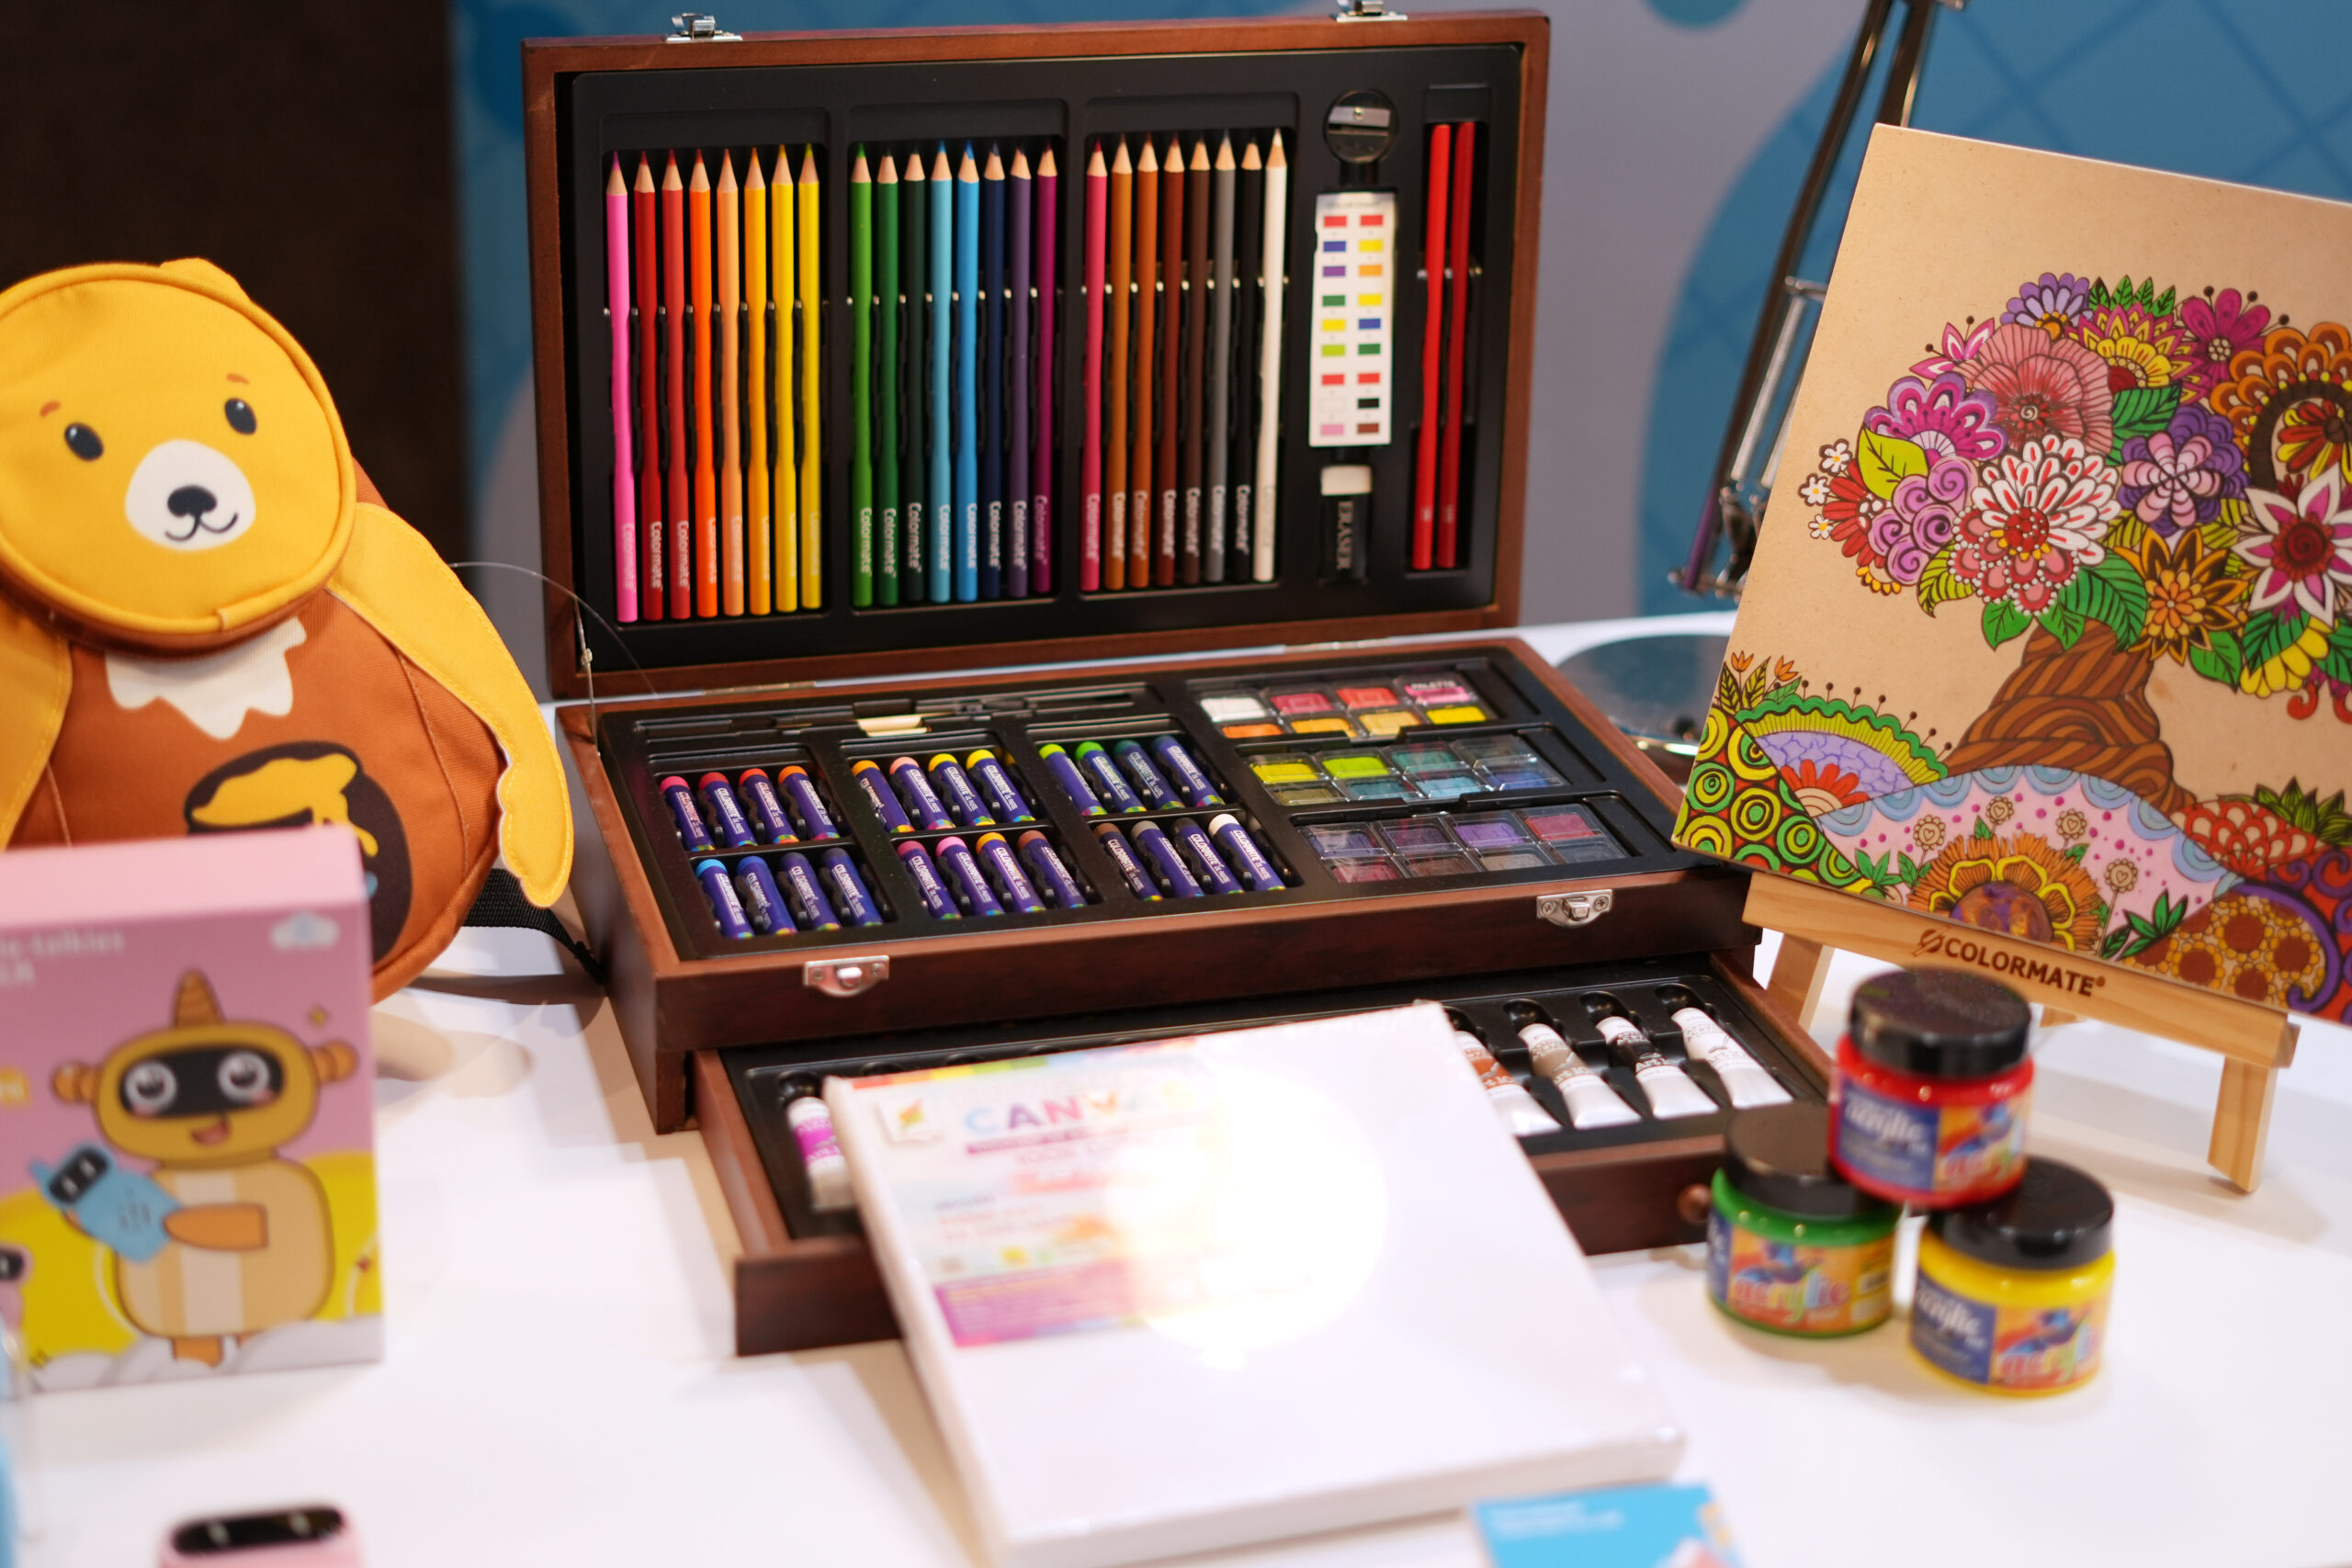 Creative stationery is another point of focus at the Fairs.